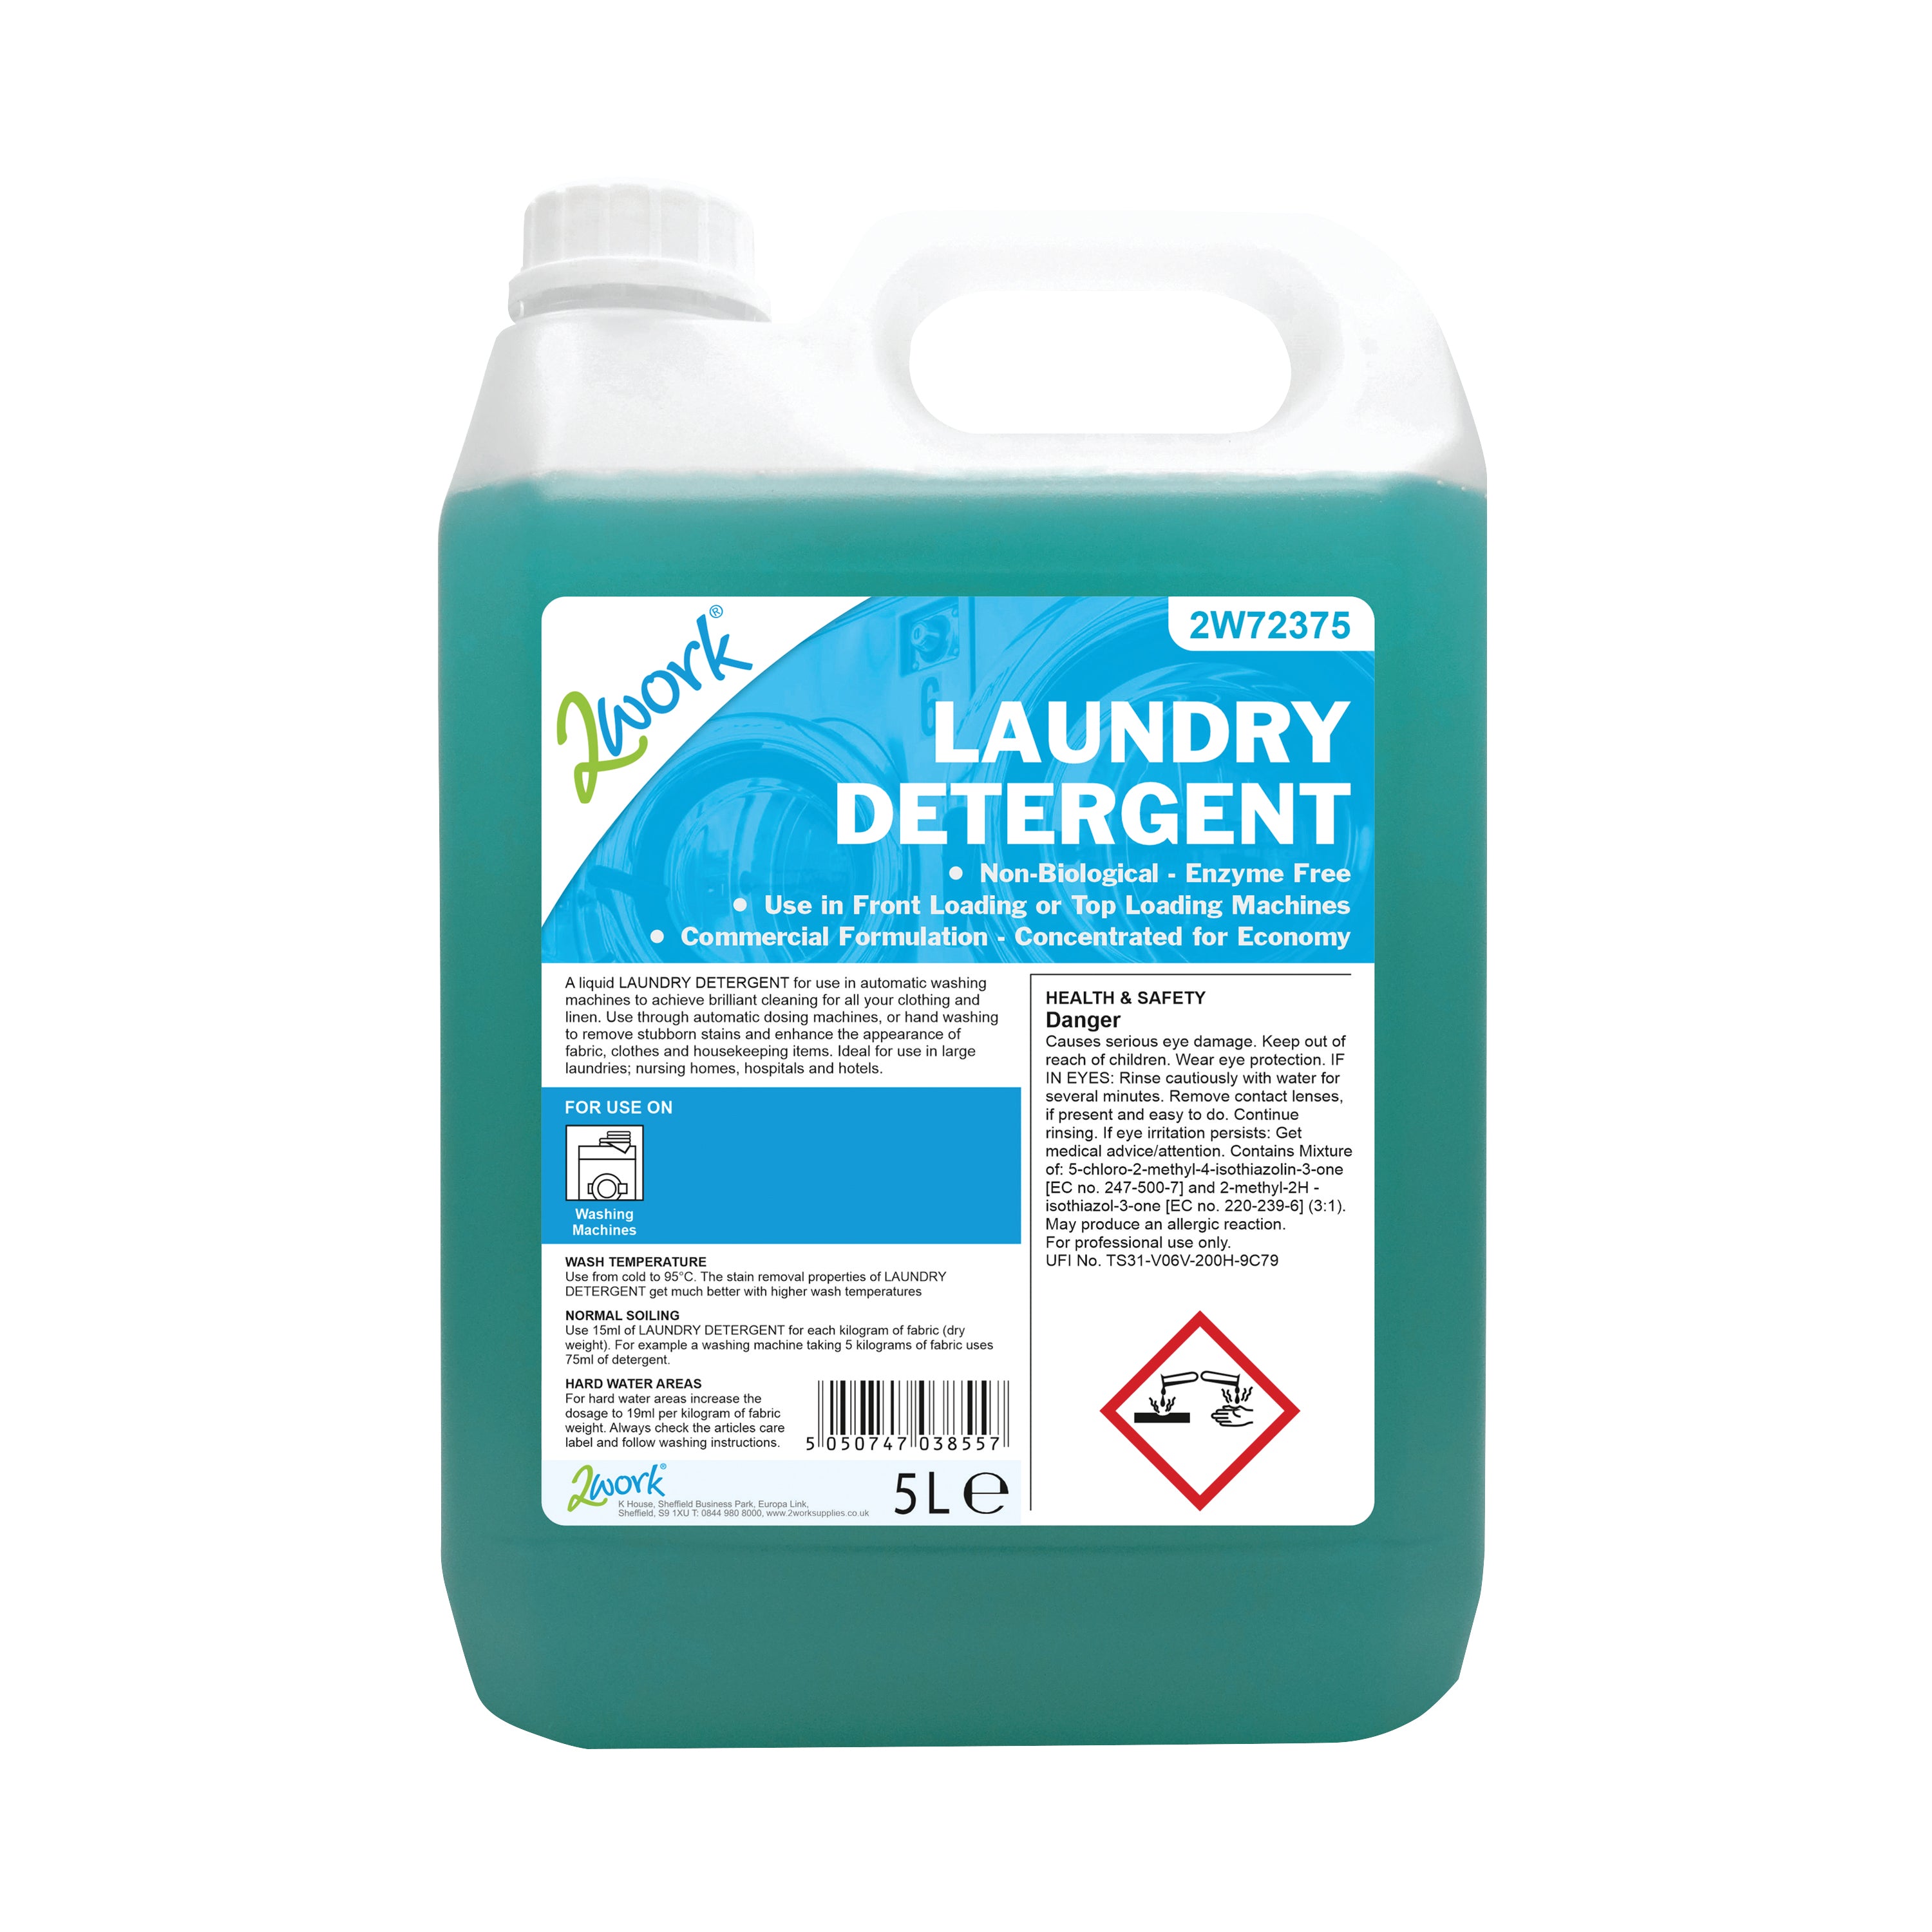 2Work Laundry Detergent Non-Biological Concentrate For Auto-dosing Machines 5 Litre 2W72375